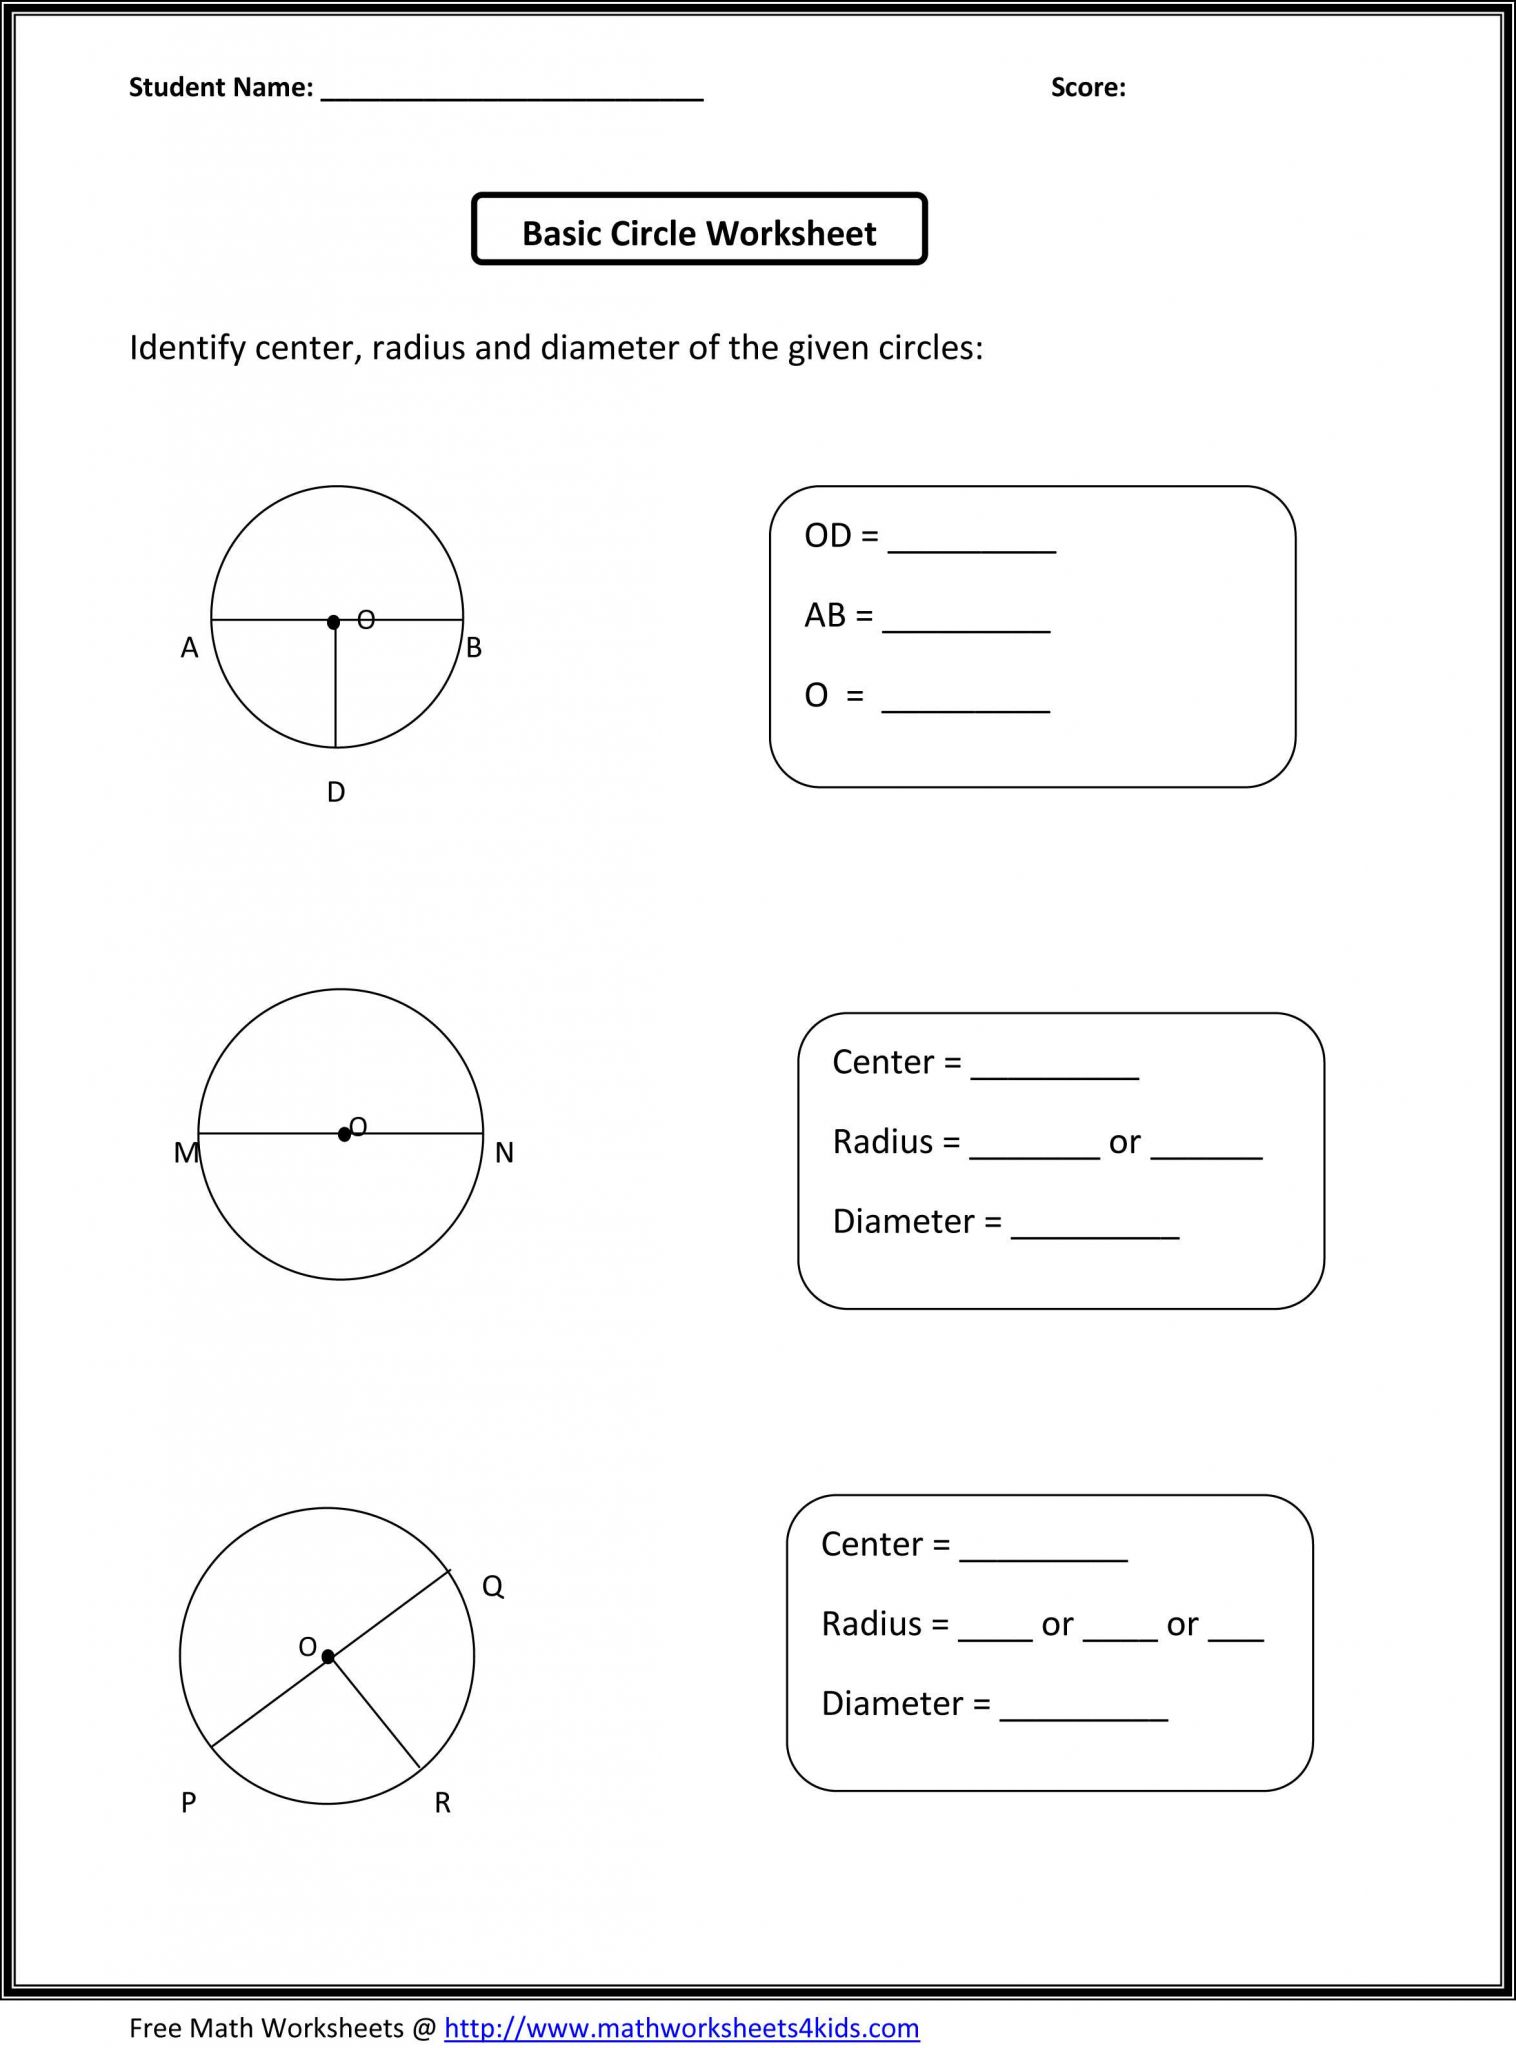 Act Math Practice Worksheets with 5th Grade Math Test Practice Worksheets Awesome 5th Grade Math Occt